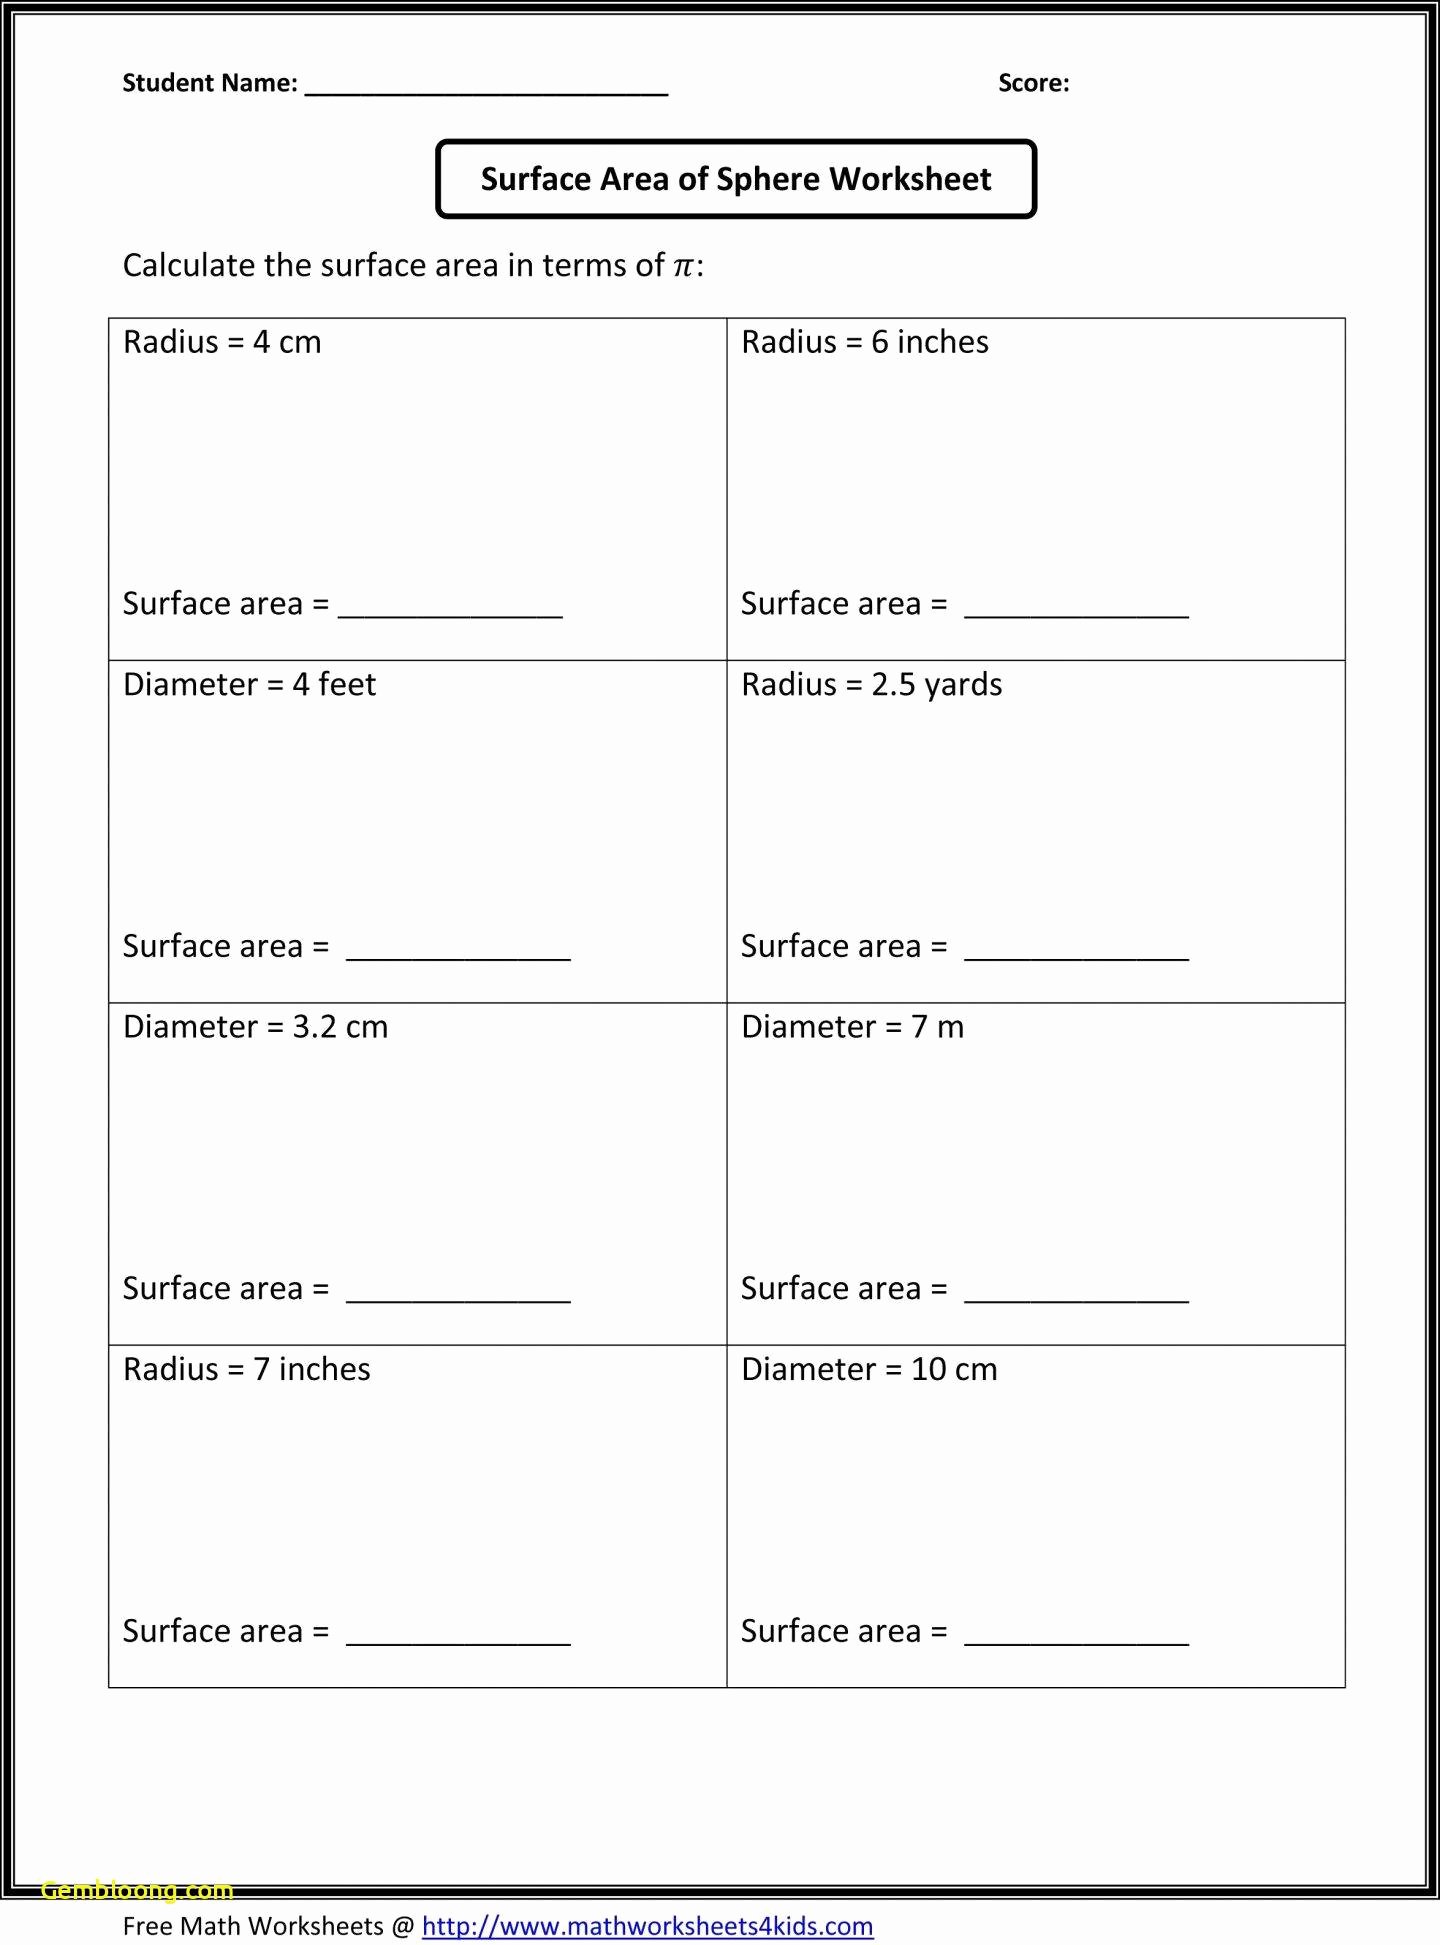 Sequences and Series Worksheet Answers Beautiful Geometric Sequences and Series Worksheet Answers